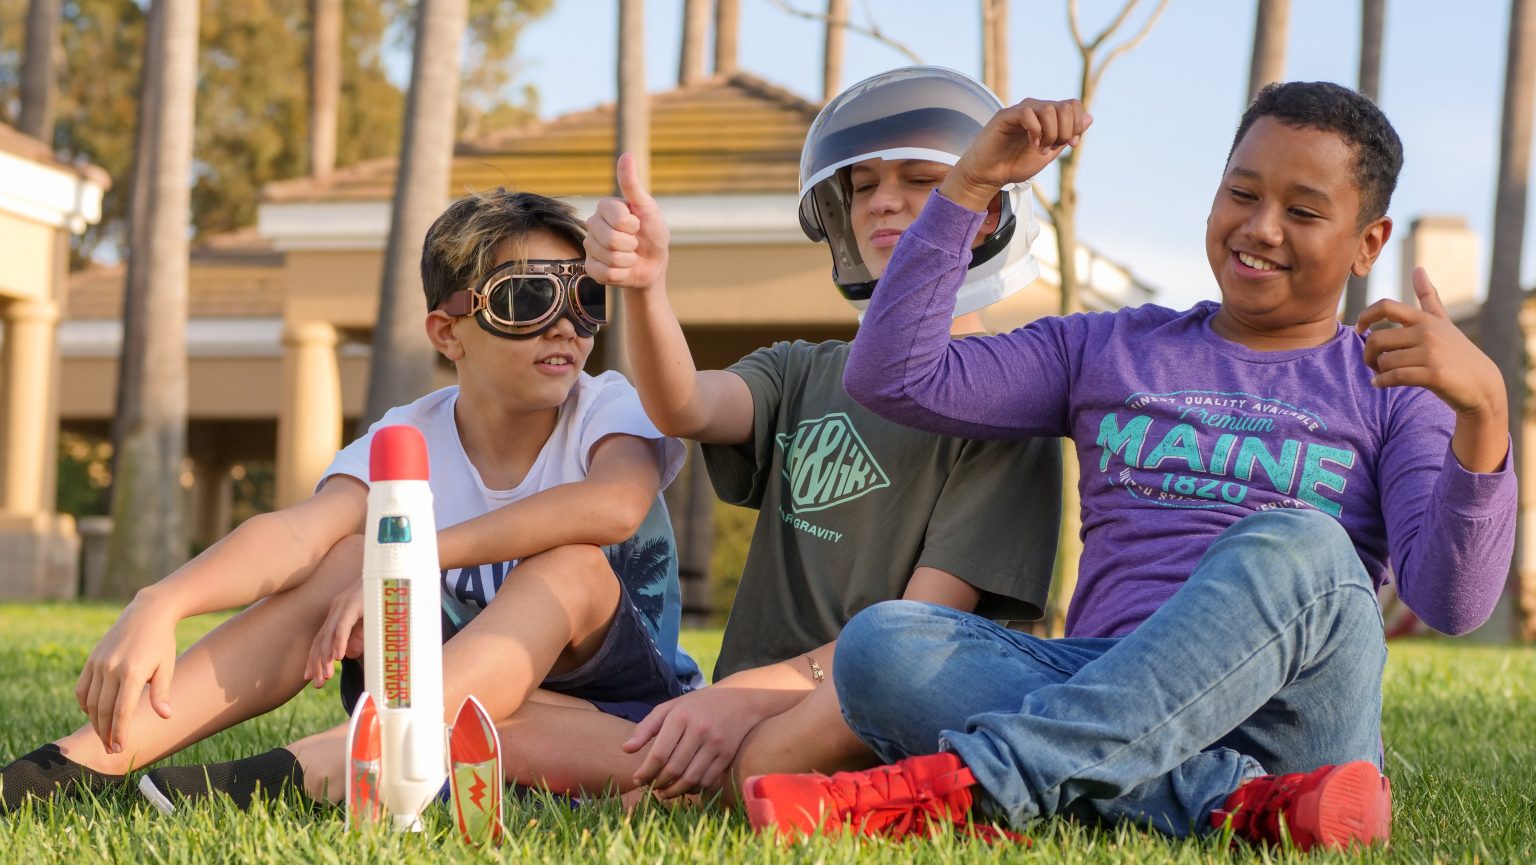 Kids doing a hands-on activity with a model rocket